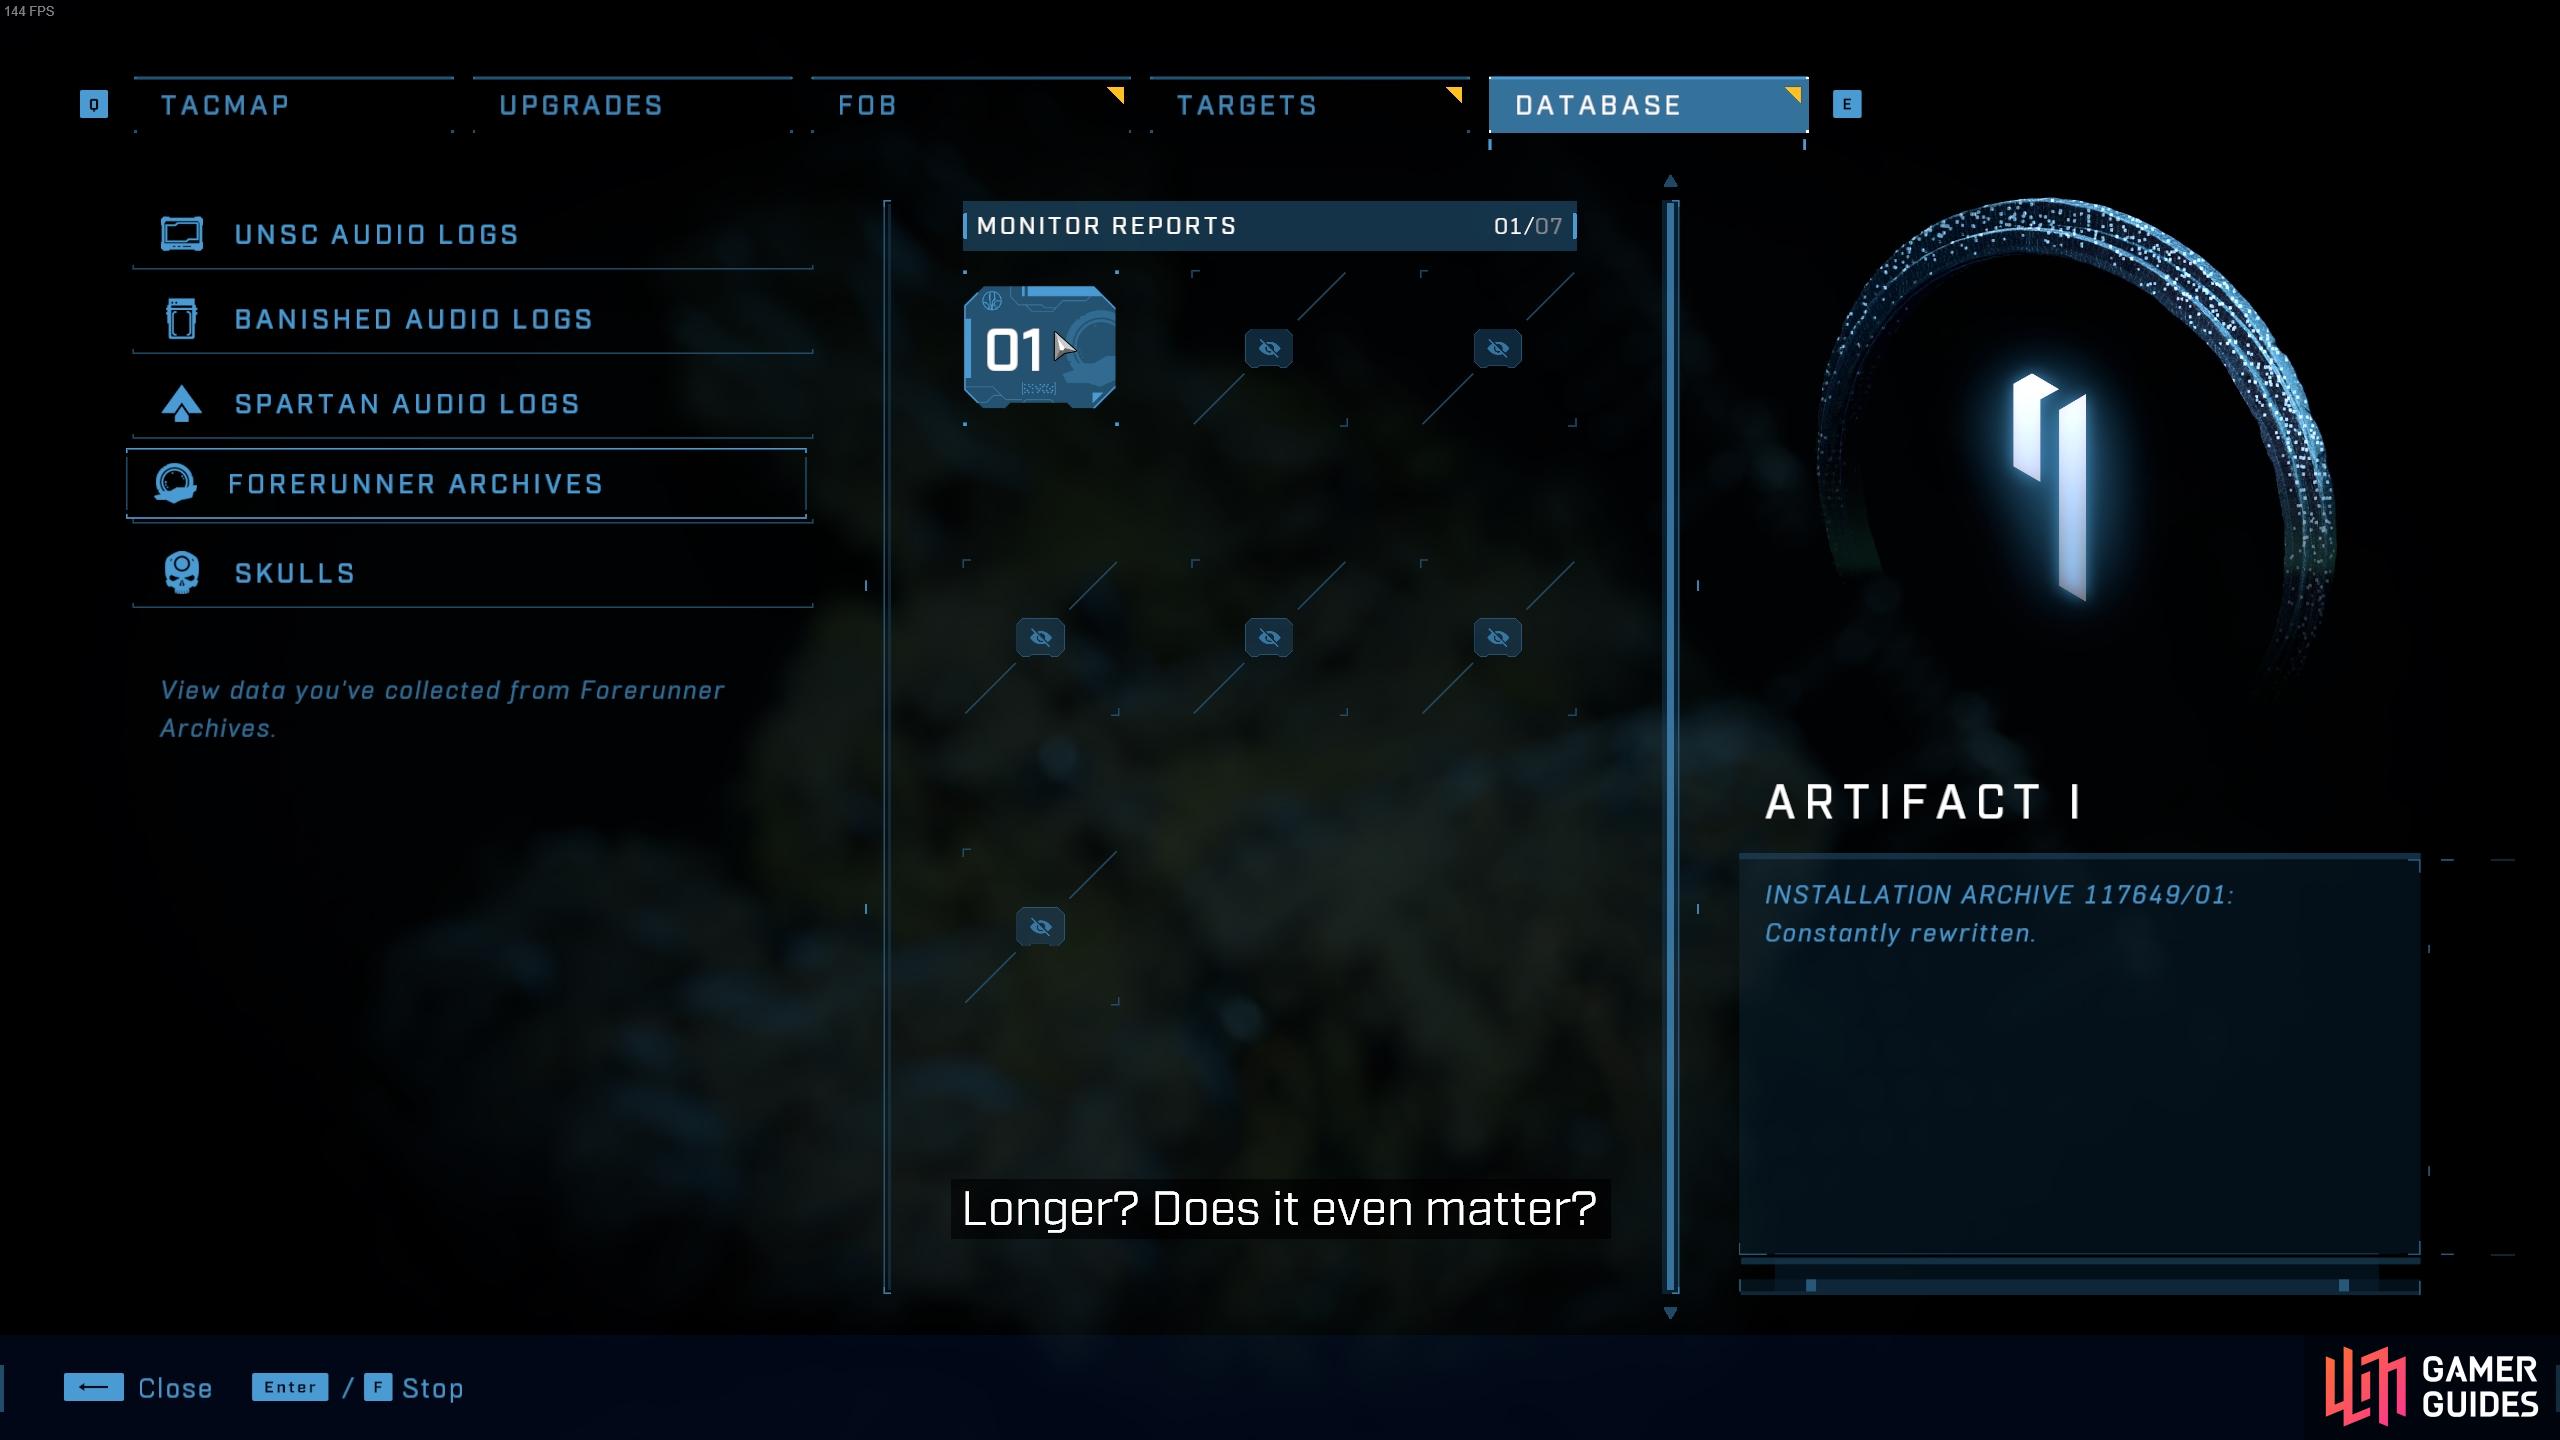 You can view the forerunner archives menu in the database to listen to the audio log.